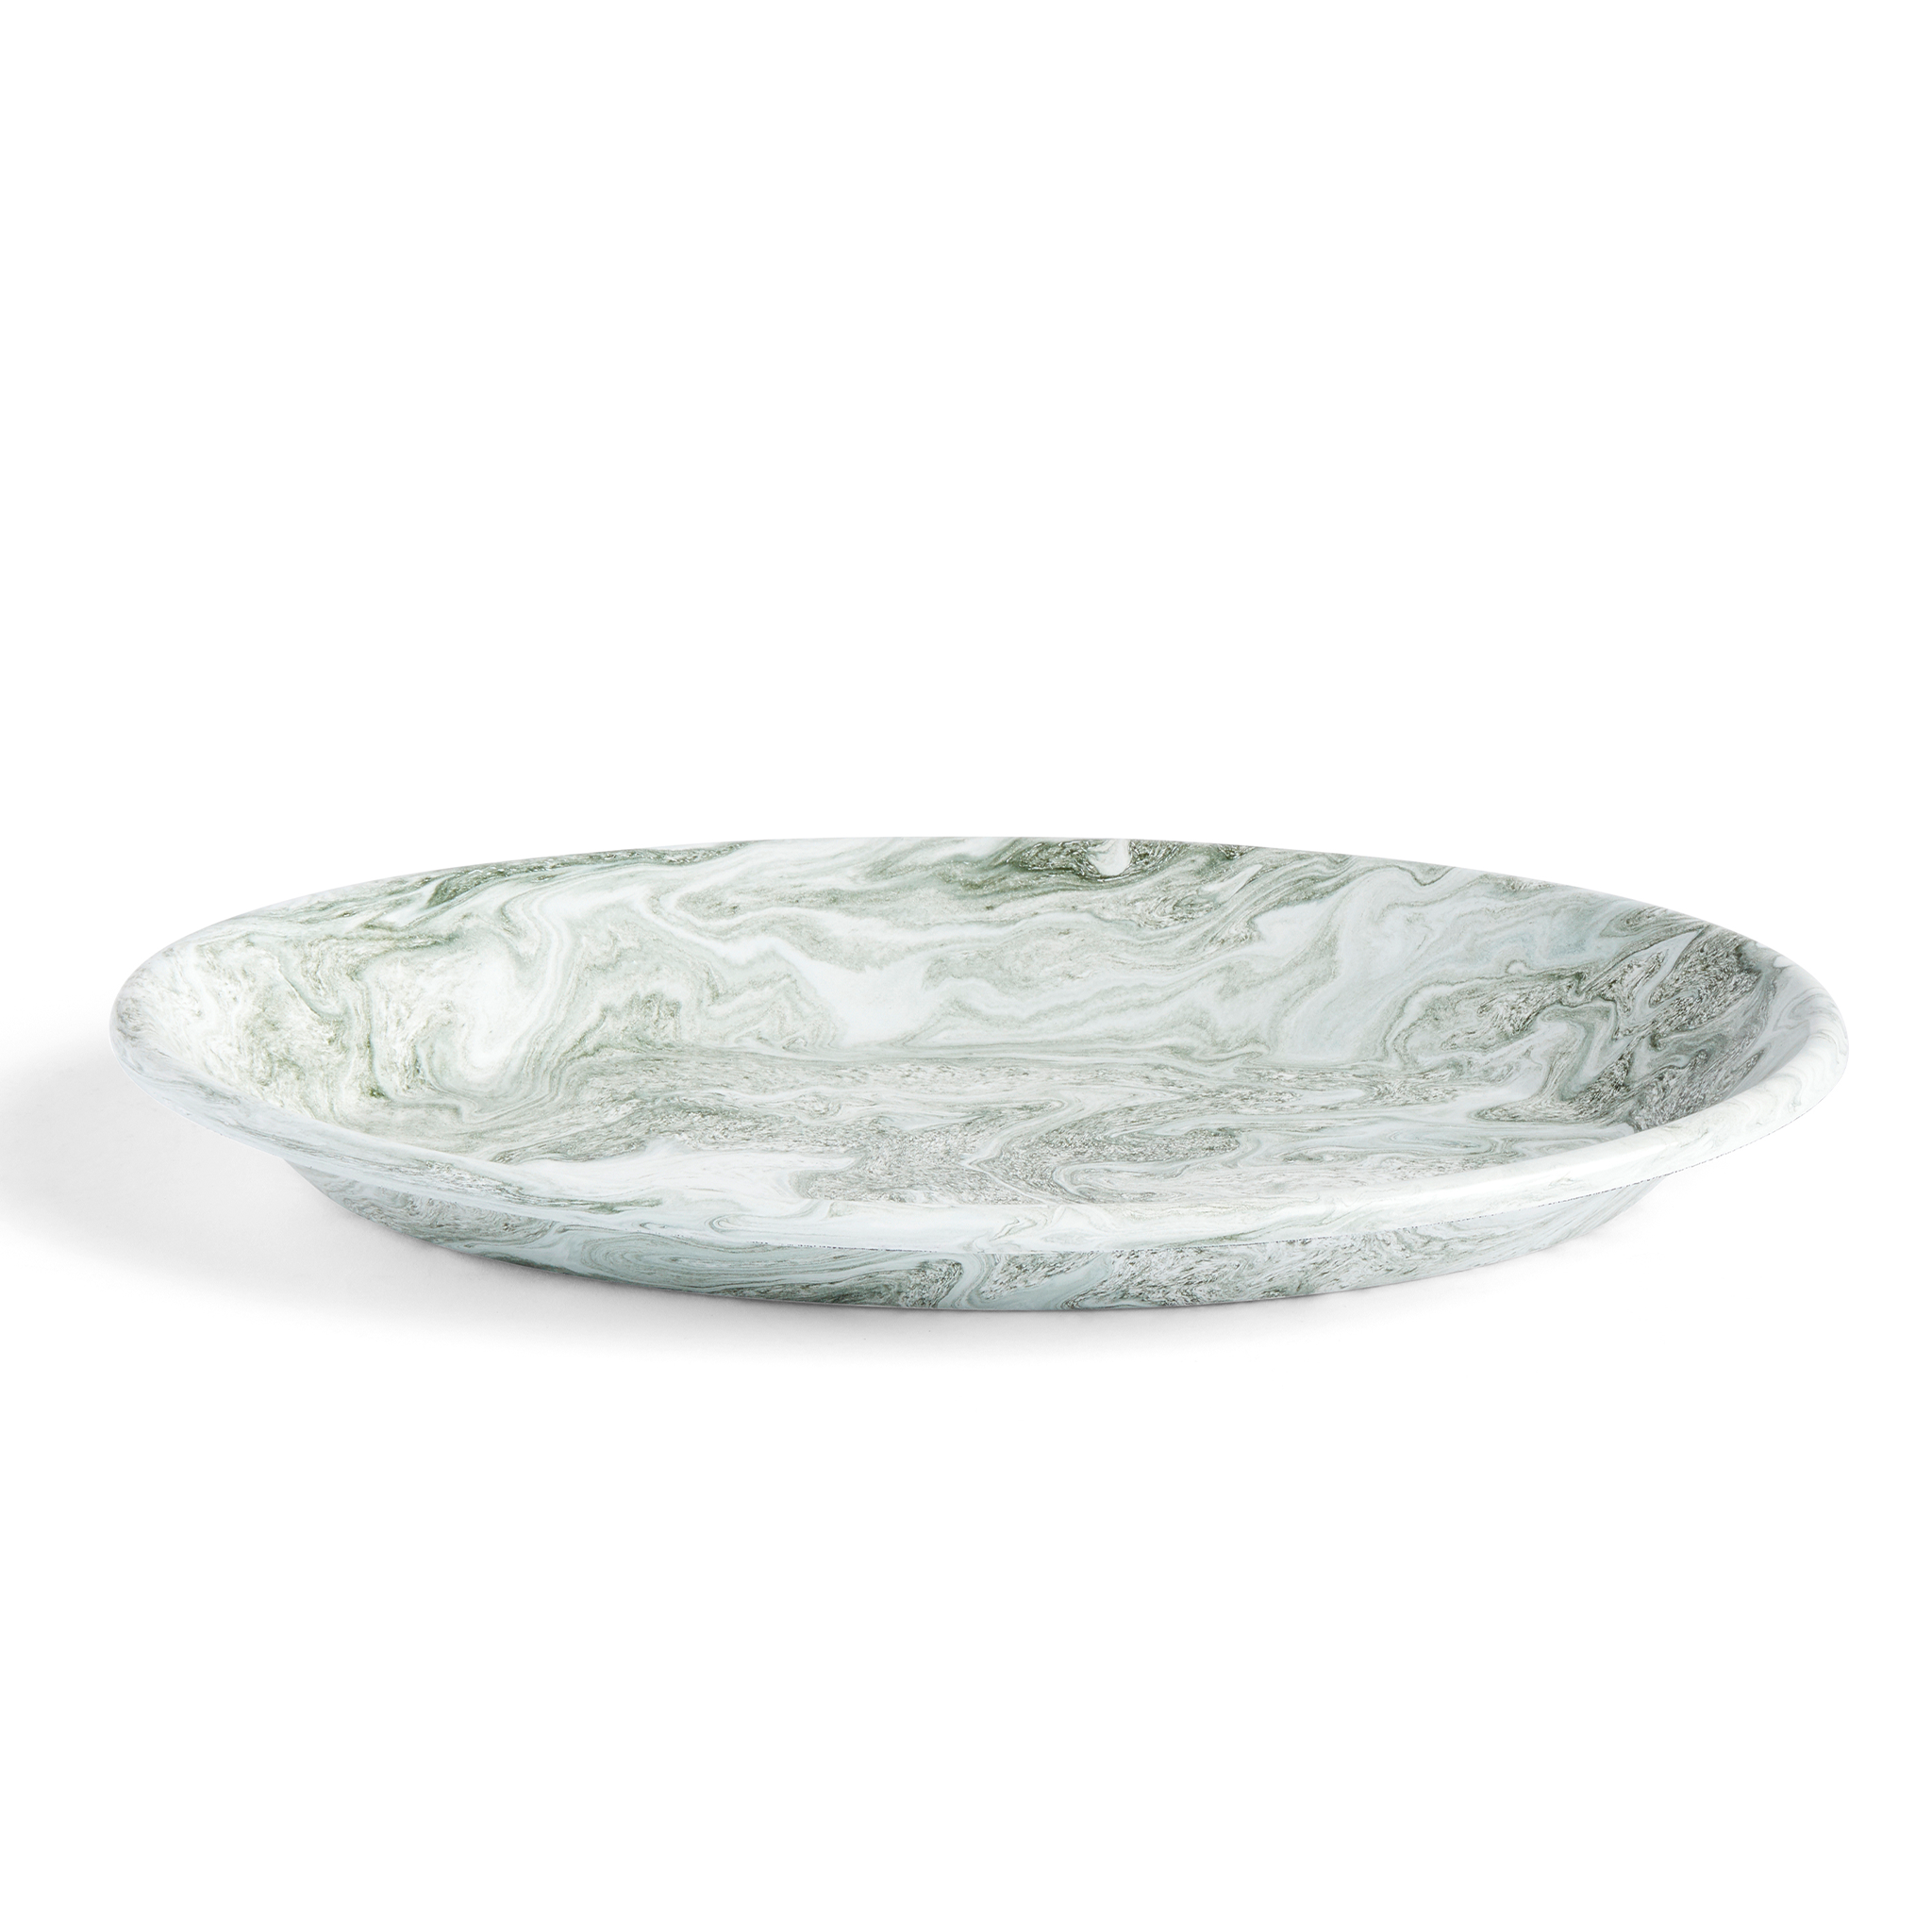 Soft Ice Oval Dish by Hay